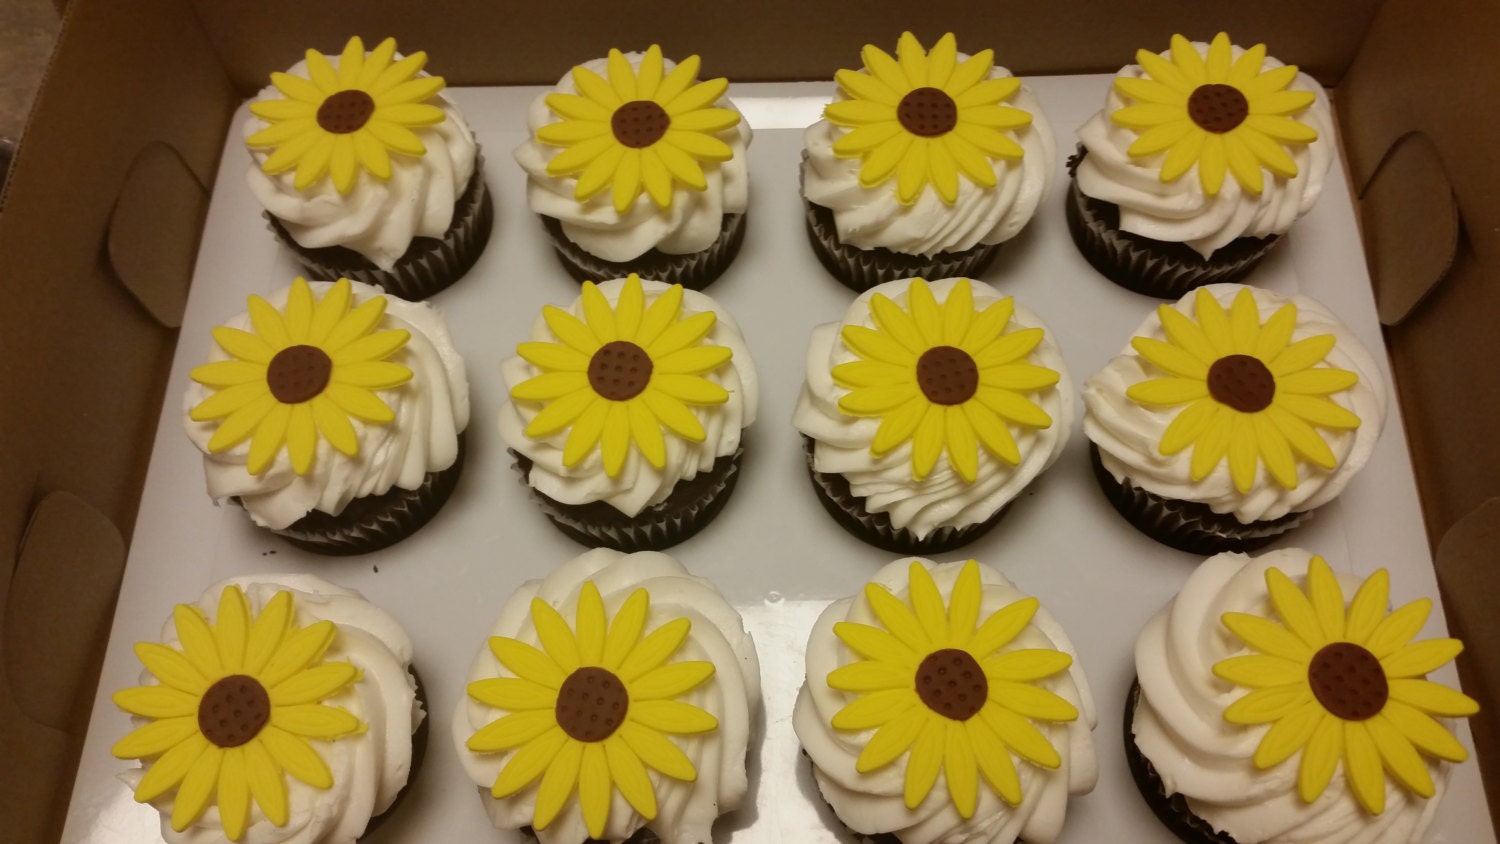 Edible Fondant Sunflowers Cupcake and Cake Toppers